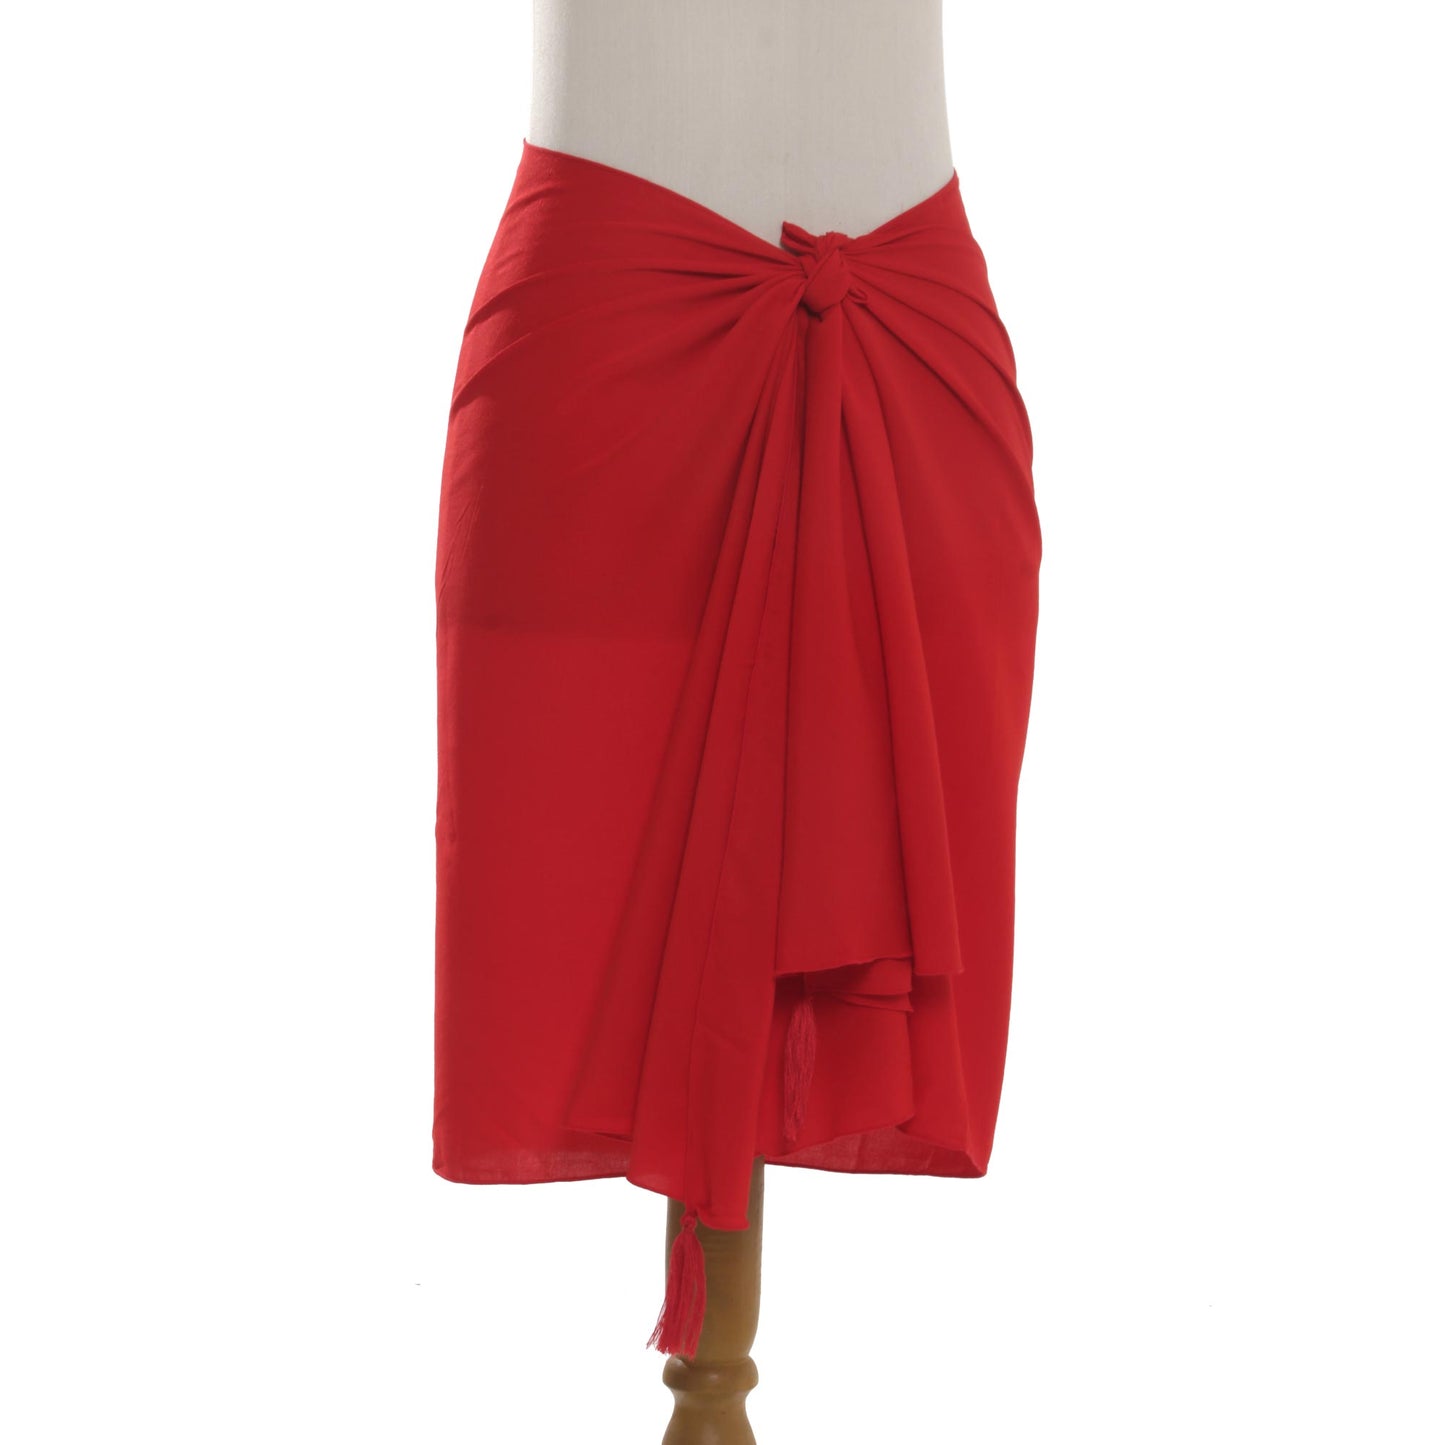 Paradise Breeze in Red Handmade Red 100% Rayon Sarong from Indonesia